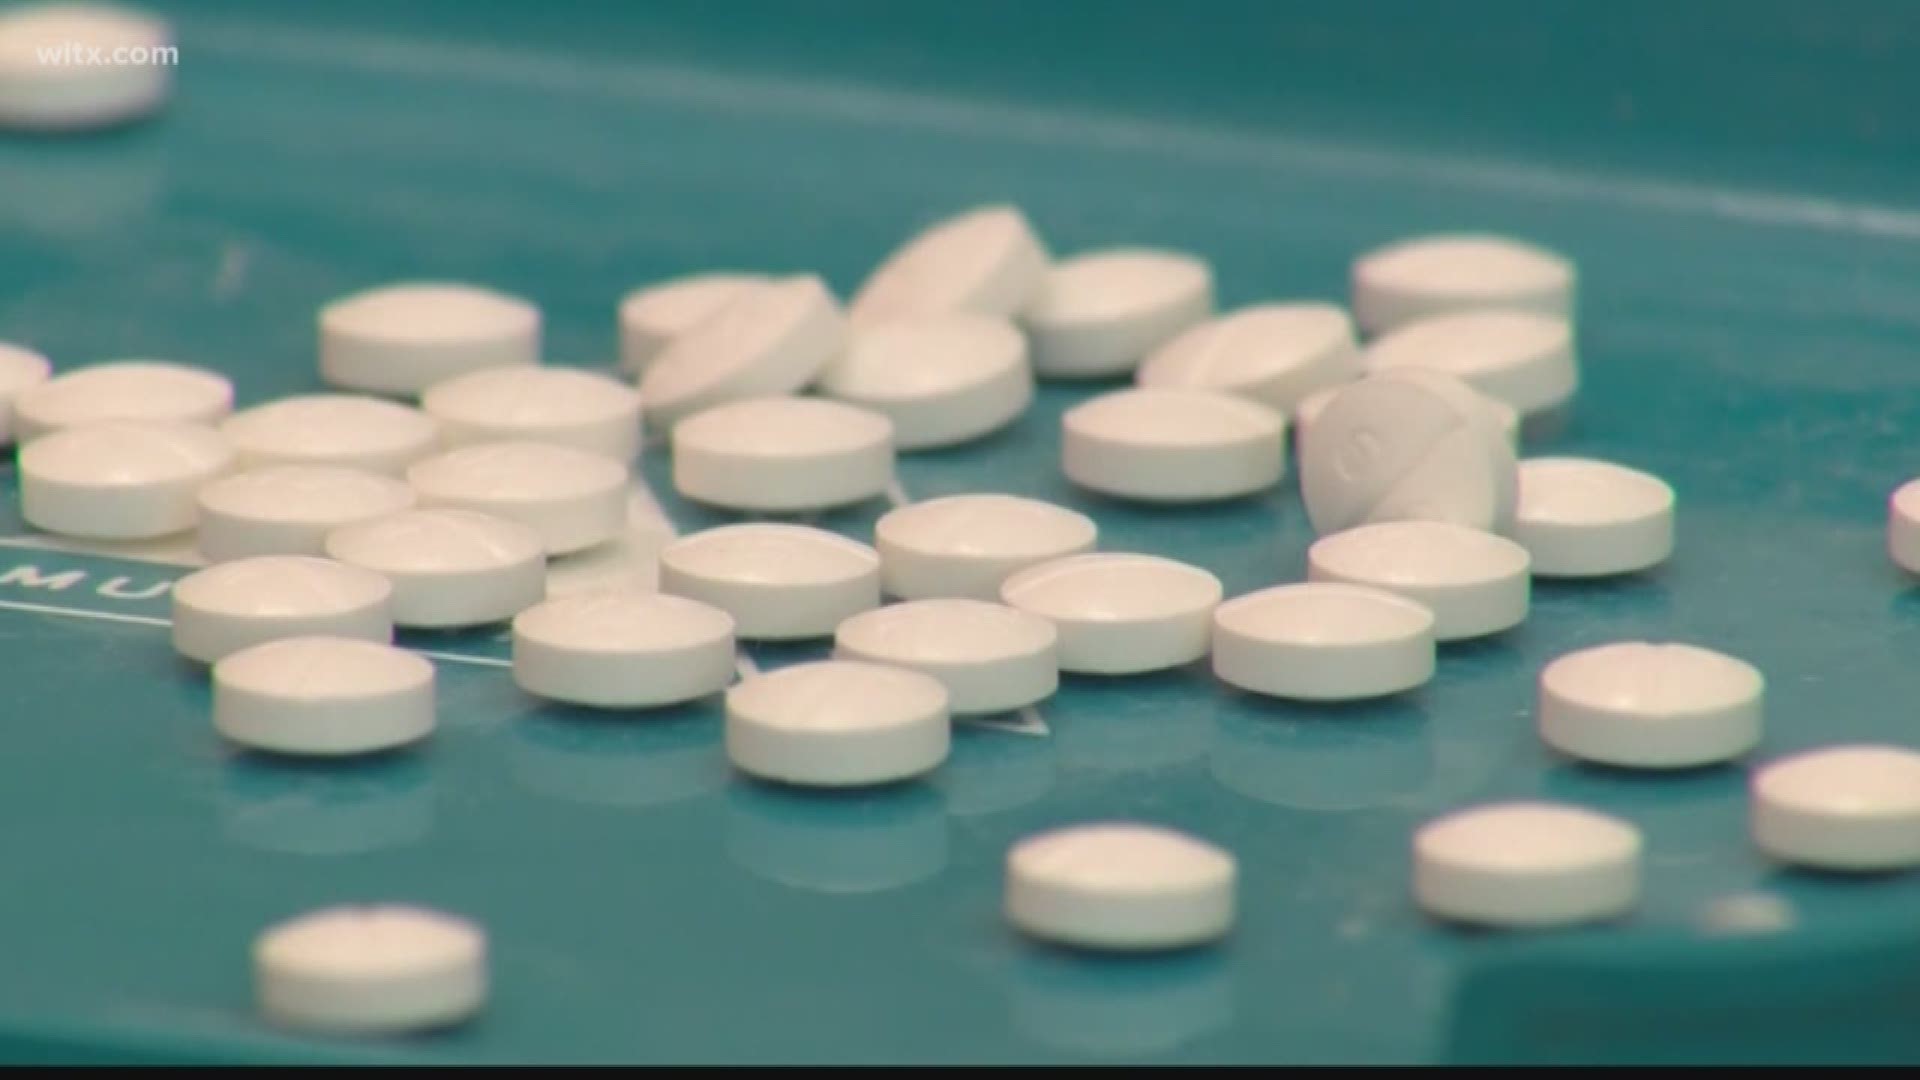 Three of the state's leading health care organizations joined forces to address the opioid problem.  News19's Chandler Mack reports.